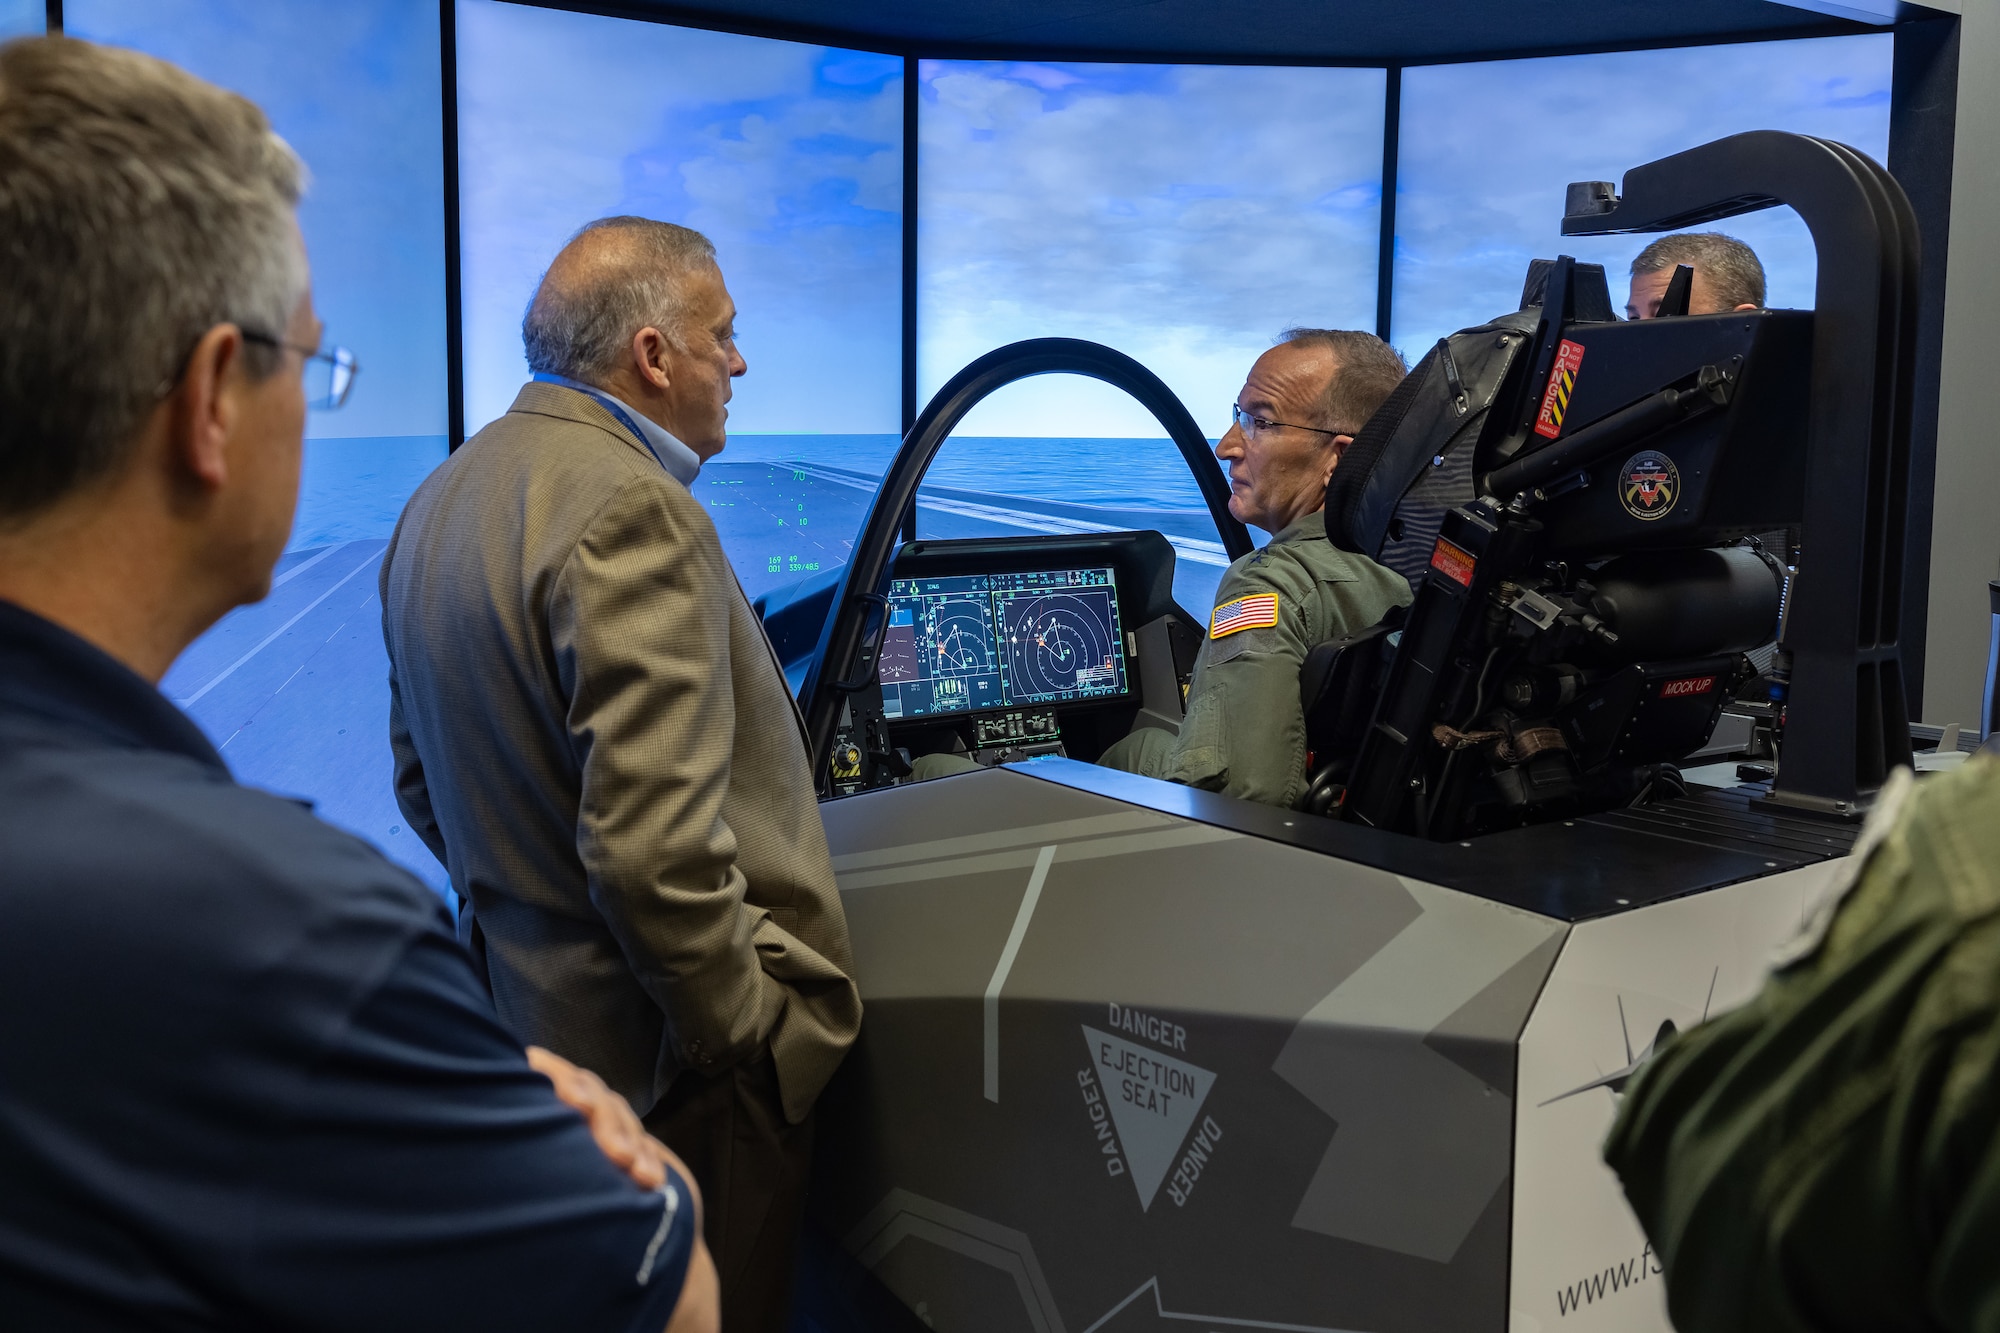 Lt. Gen. John Healy, Commander of Air Force Reserve Command, engages with the future of aviation through an F-35 cockpit simulator, during a tour of Lockheed Martin's production line, signaling a hands-on approach to modern warfare readiness. (Photos courtesy of Lockheed Martin Aeronautics Company)